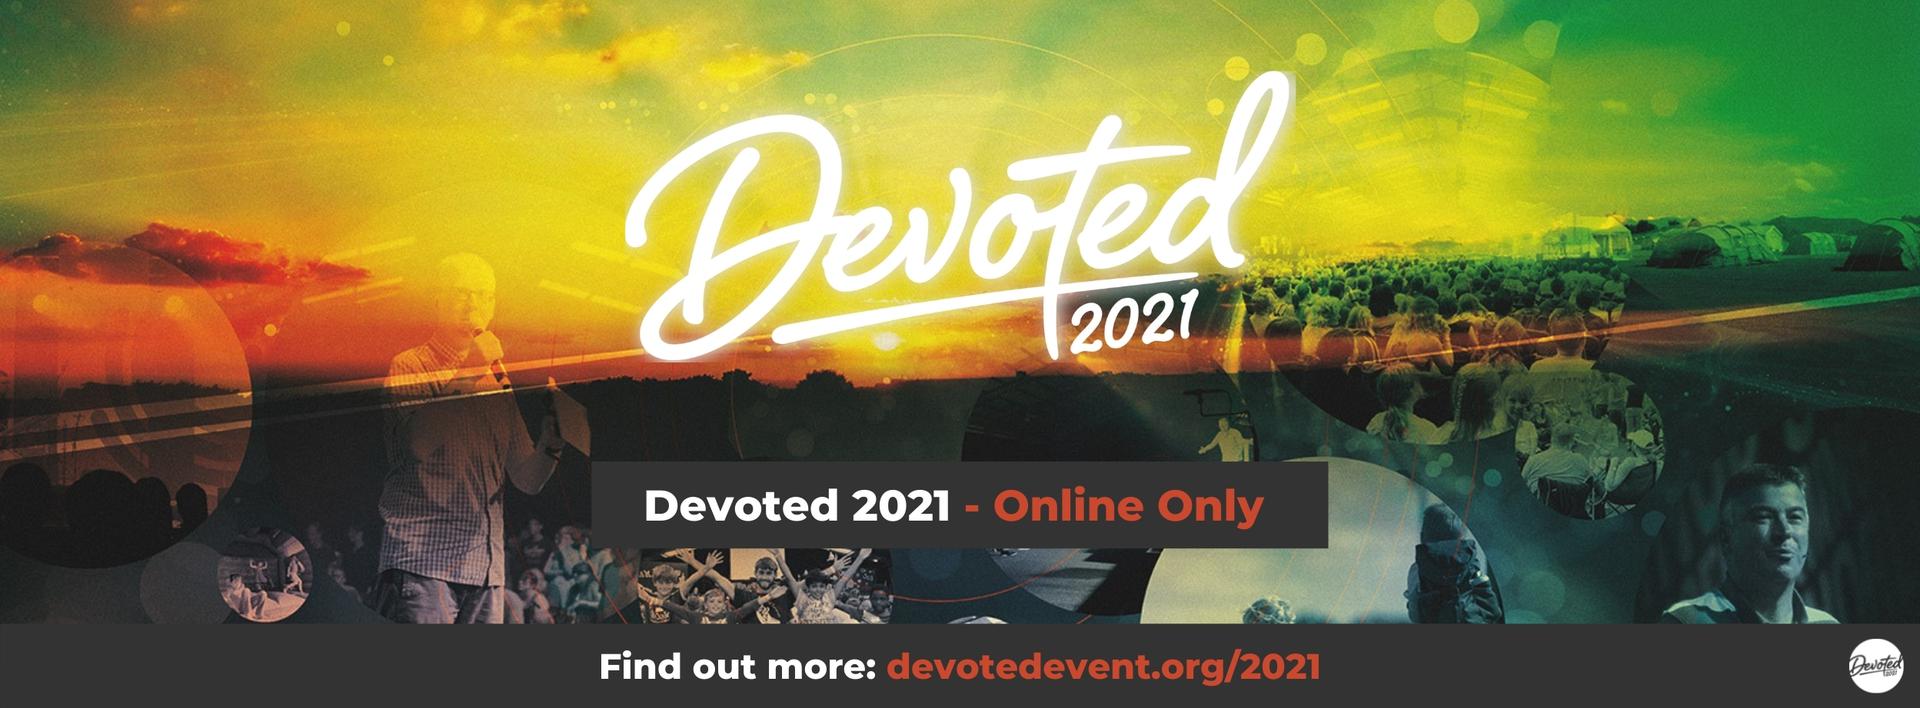 Devoted 2021 - Subscribe to YouTube